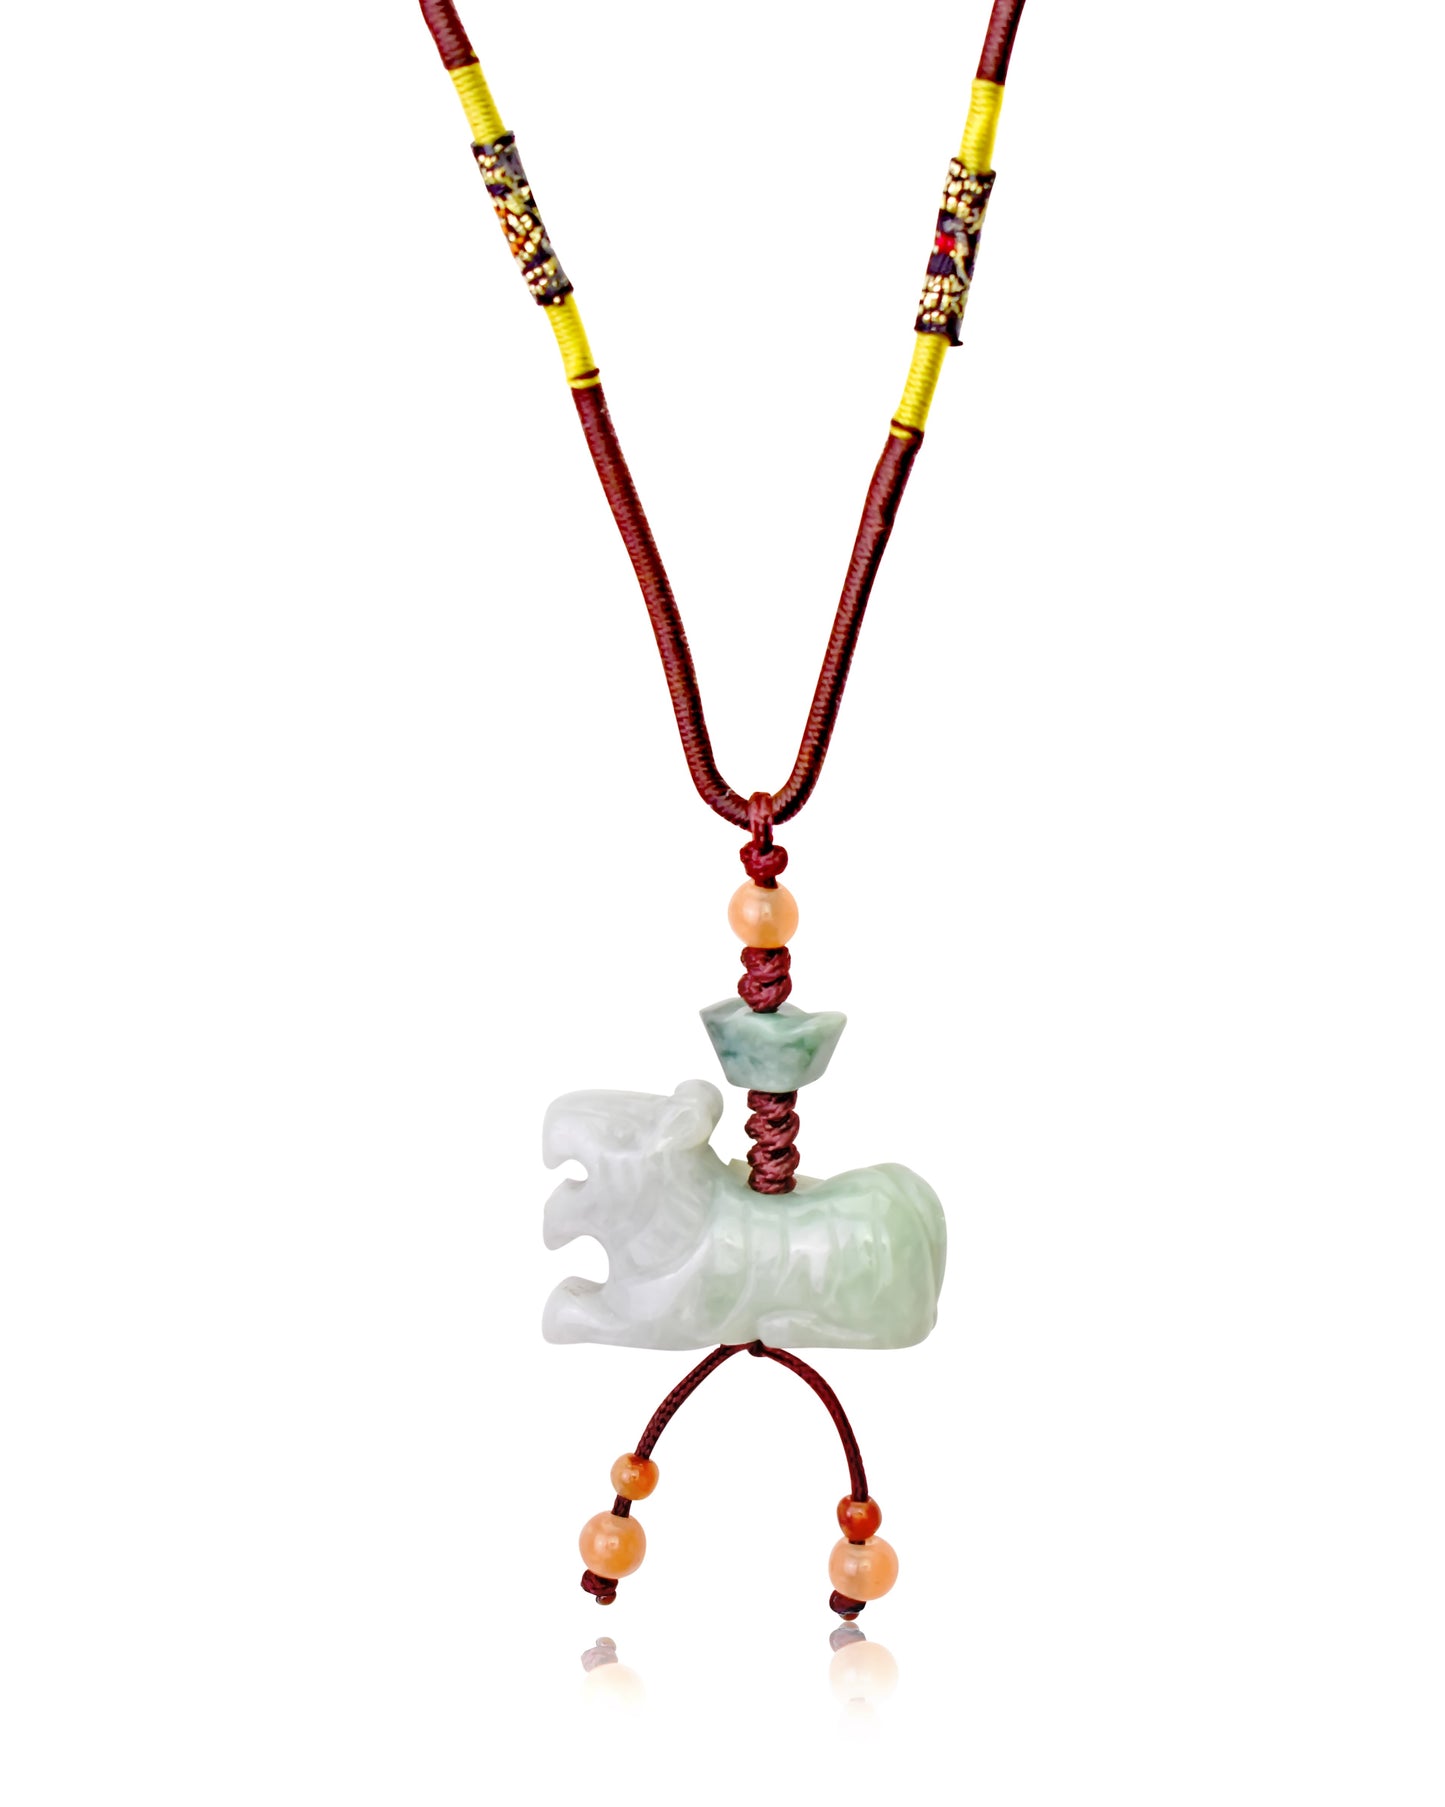 Shine with Confidence with the Tiger Chinese Zodiac Necklace made with Brown Cord